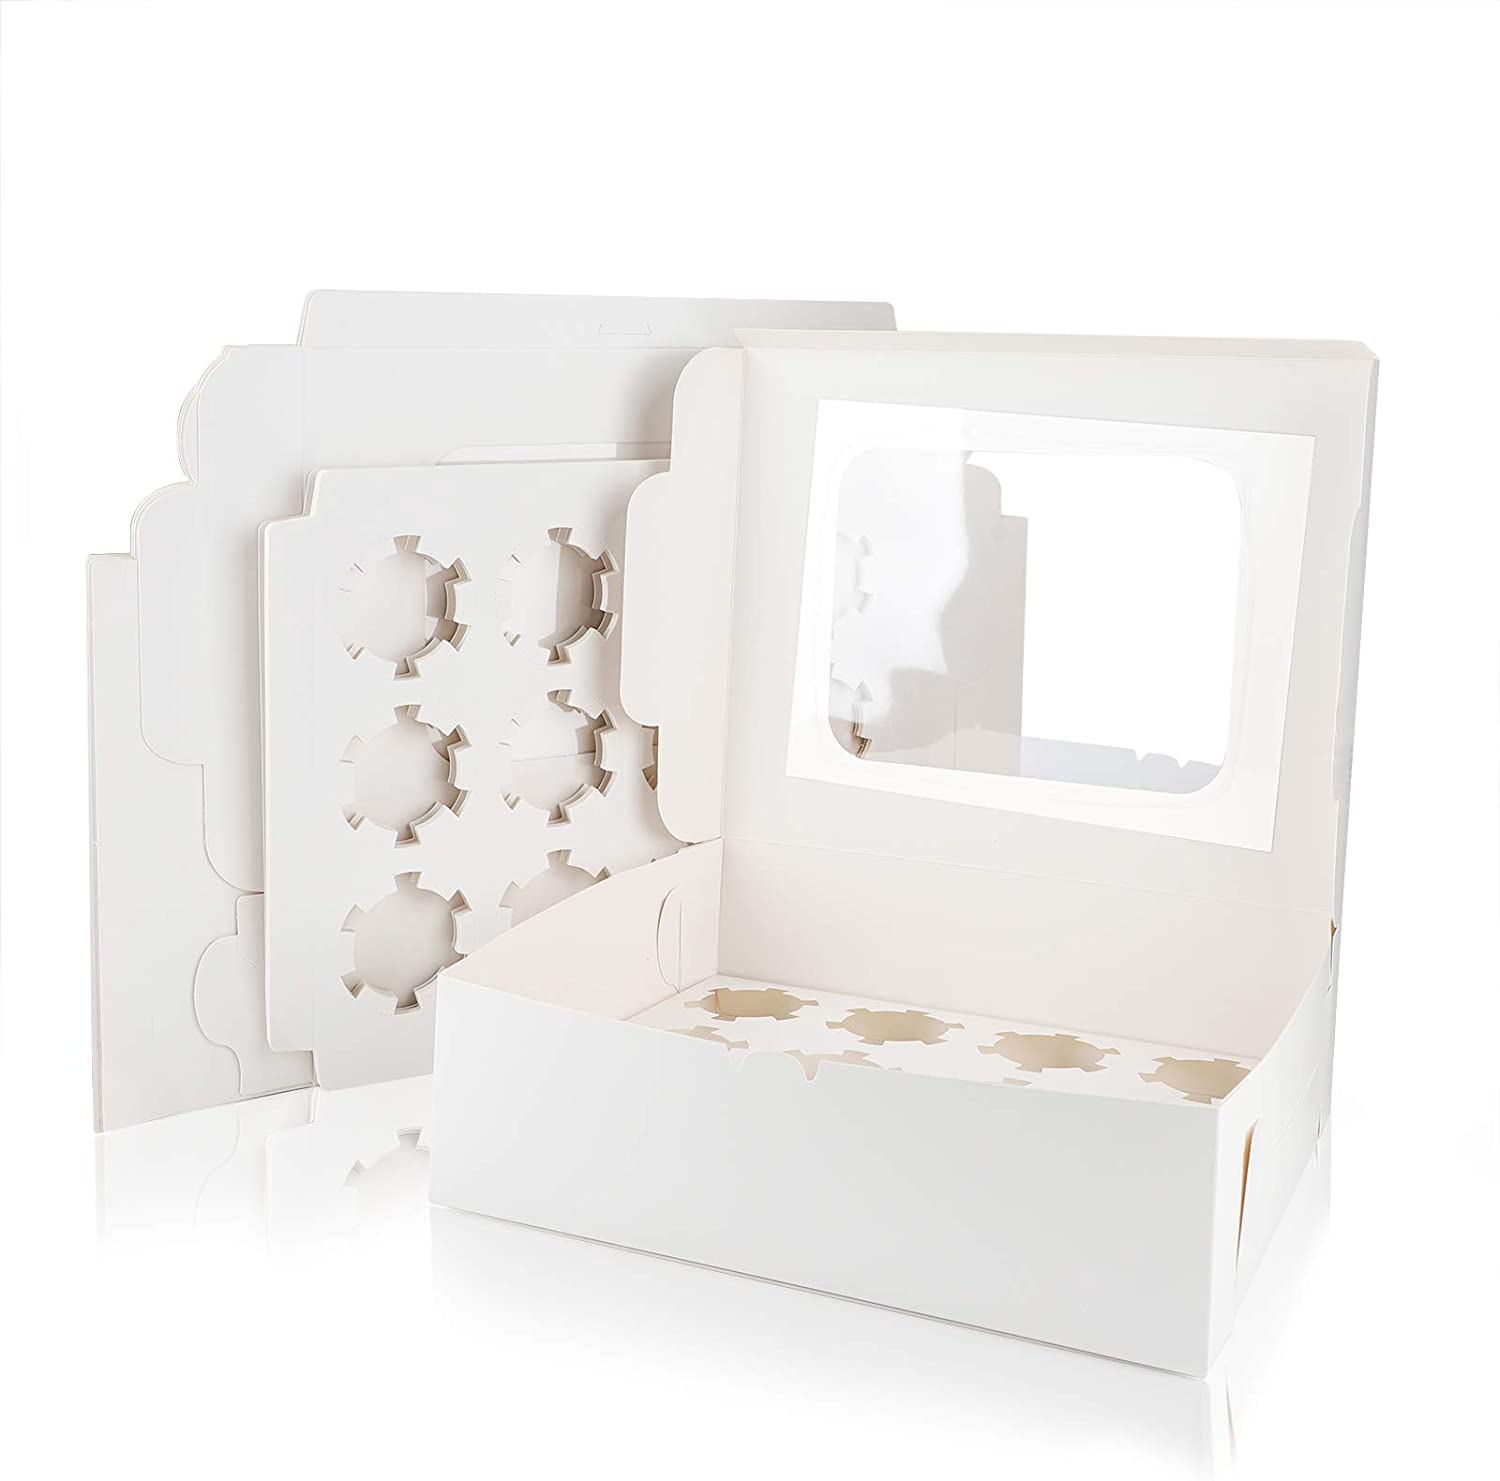 Cupcake Boxes, Disposable Bakery Paper Cupcake Boxes Carrier 15pcs, Mini Cupcake  packaging carton box with Insert and Display Window,Thick Sturdy Cake  Storage Boxes Holding 12 pcs cupcakes | Walmart Canada